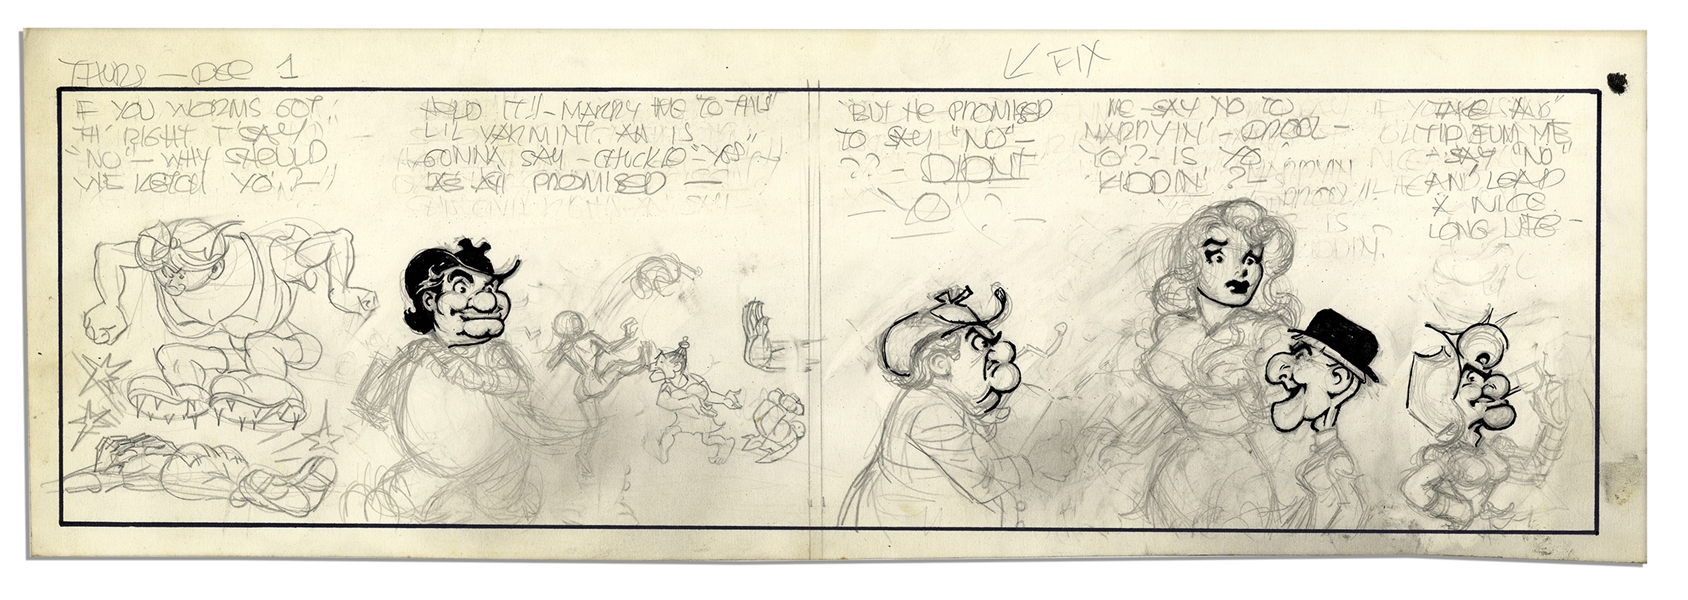 Al Capp ''Li'l Abner'' Unfinished Hand-Drawn Comic Strip -- Featuring Daisy Mae & Mammy Yokum -- Measures 19'' x 6.25'' in Pencil & Ink -- Very Good -- From the Al Capp Estate